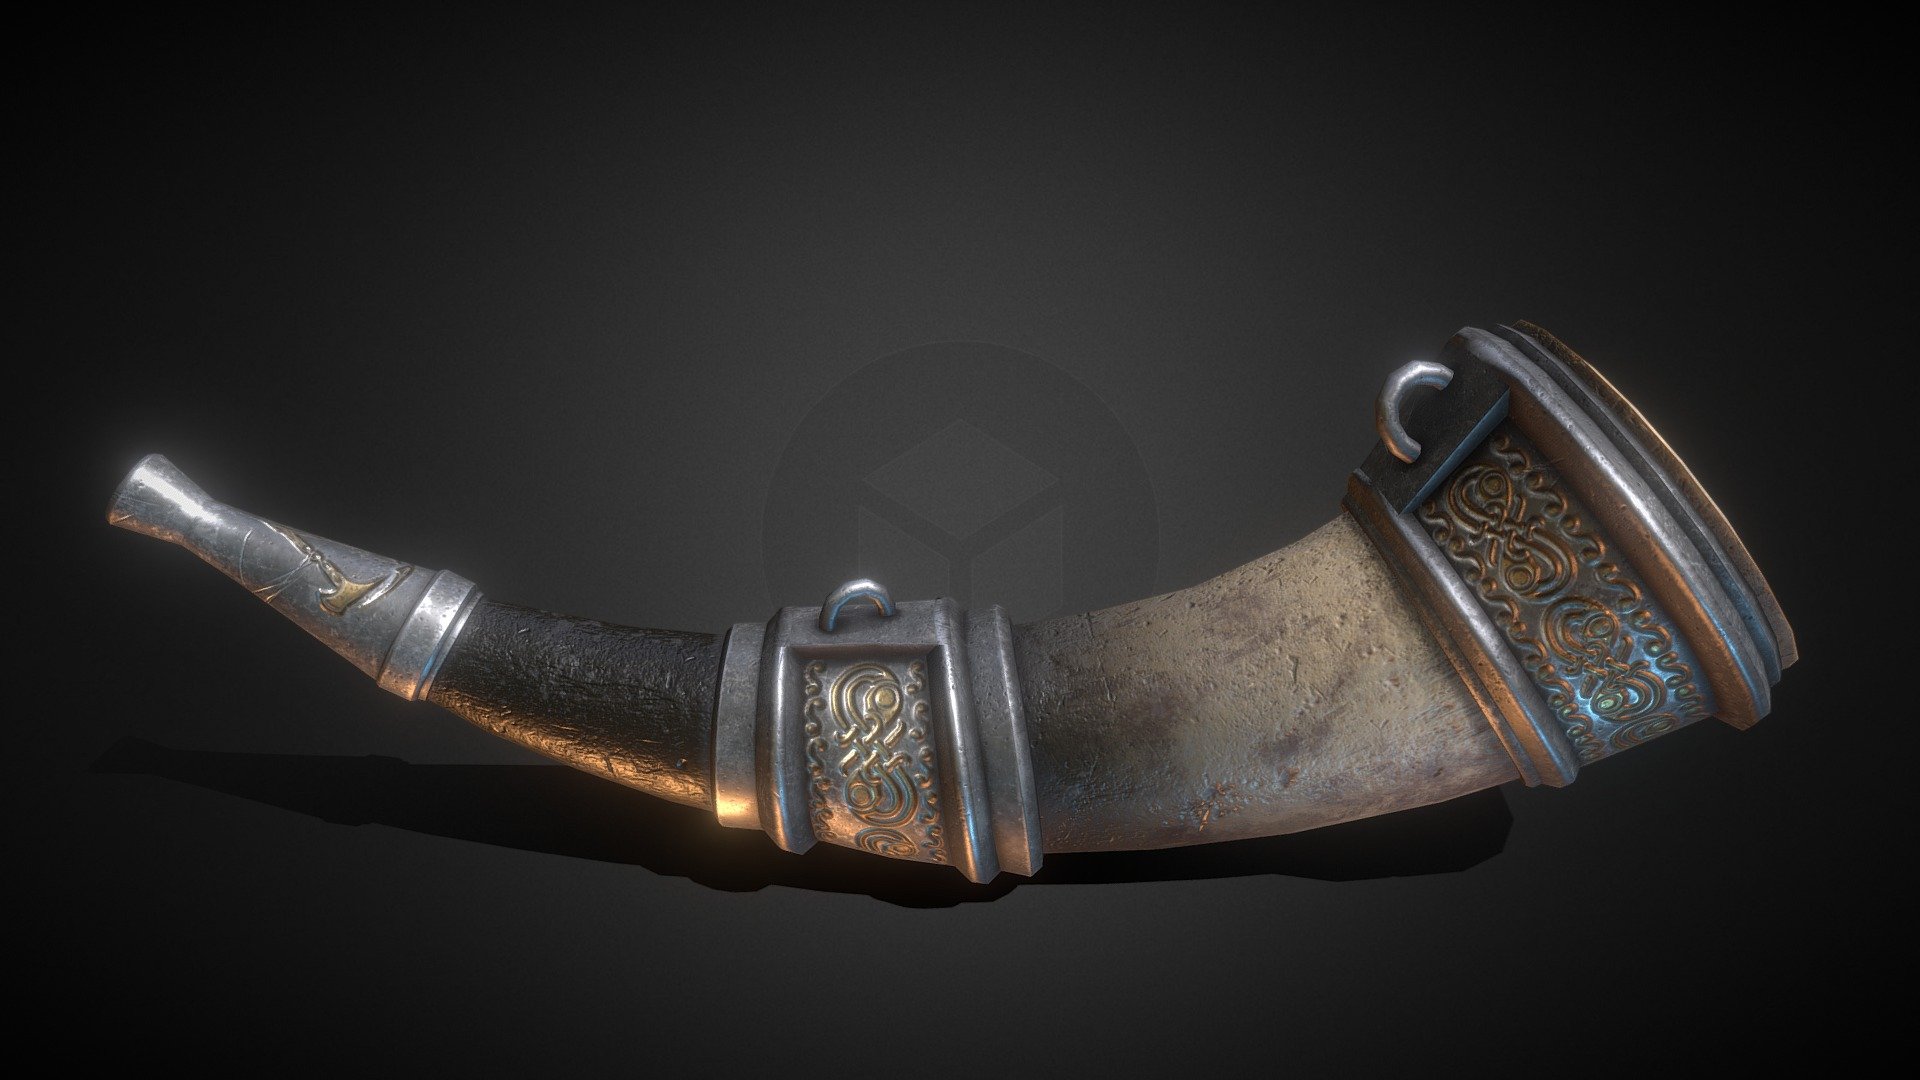 Hey all, as recently Assassin's Creed Valhalla premiered globally, it inspired me to do some fan art. so here I tried to create Viking Horn, Everything was done using Maya,Texturing Substance Painter,rendered using Marmoset tool bag.I hope you like it smiley. 

Artstaion Link:https://www.artstation.com/artwork/YeLDb3 - Assassin's Creed Valhalla Fan Art Horn - Buy Royalty Free 3D model by Pratik Jadhav (@PratikJadhav) 3d model